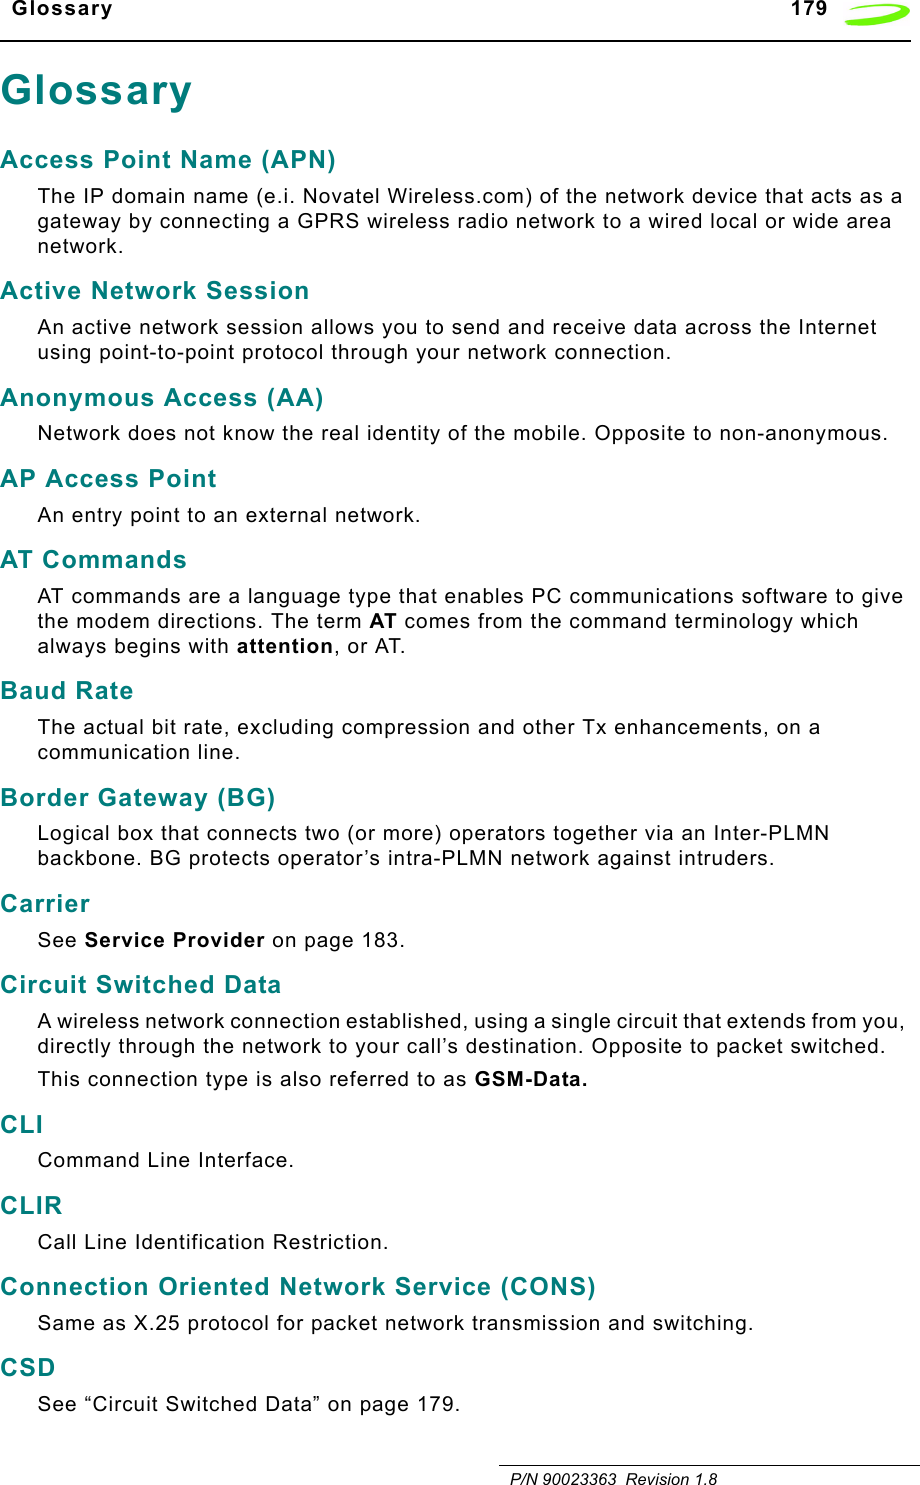   Glossary 179   P/N 90023363  Revision 1.8GlossaryAccess Point Name (APN)The IP domain name (e.i. Novatel Wireless.com) of the network device that acts as a gateway by connecting a GPRS wireless radio network to a wired local or wide area network.Active Network SessionAn active network session allows you to send and receive data across the Internet using point-to-point protocol through your network connection.Anonymous Access (AA)Network does not know the real identity of the mobile. Opposite to non-anonymous.AP Access PointAn entry point to an external network.AT CommandsAT commands are a language type that enables PC communications software to give the modem directions. The term AT comes from the command terminology which always begins with attention, or AT.Baud RateThe actual bit rate, excluding compression and other Tx enhancements, on a communication line.Border Gateway (BG)Logical box that connects two (or more) operators together via an Inter-PLMN backbone. BG protects operator’s intra-PLMN network against intruders.CarrierSee Service Provider on page 183.Circuit Switched DataA wireless network connection established, using a single circuit that extends from you, directly through the network to your call’s destination. Opposite to packet switched.This connection type is also referred to as GSM-Data.CLICommand Line Interface.CLIR Call Line Identification Restriction.Connection Oriented Network Service (CONS)Same as X.25 protocol for packet network transmission and switching.CSDSee “Circuit Switched Data” on page 179.